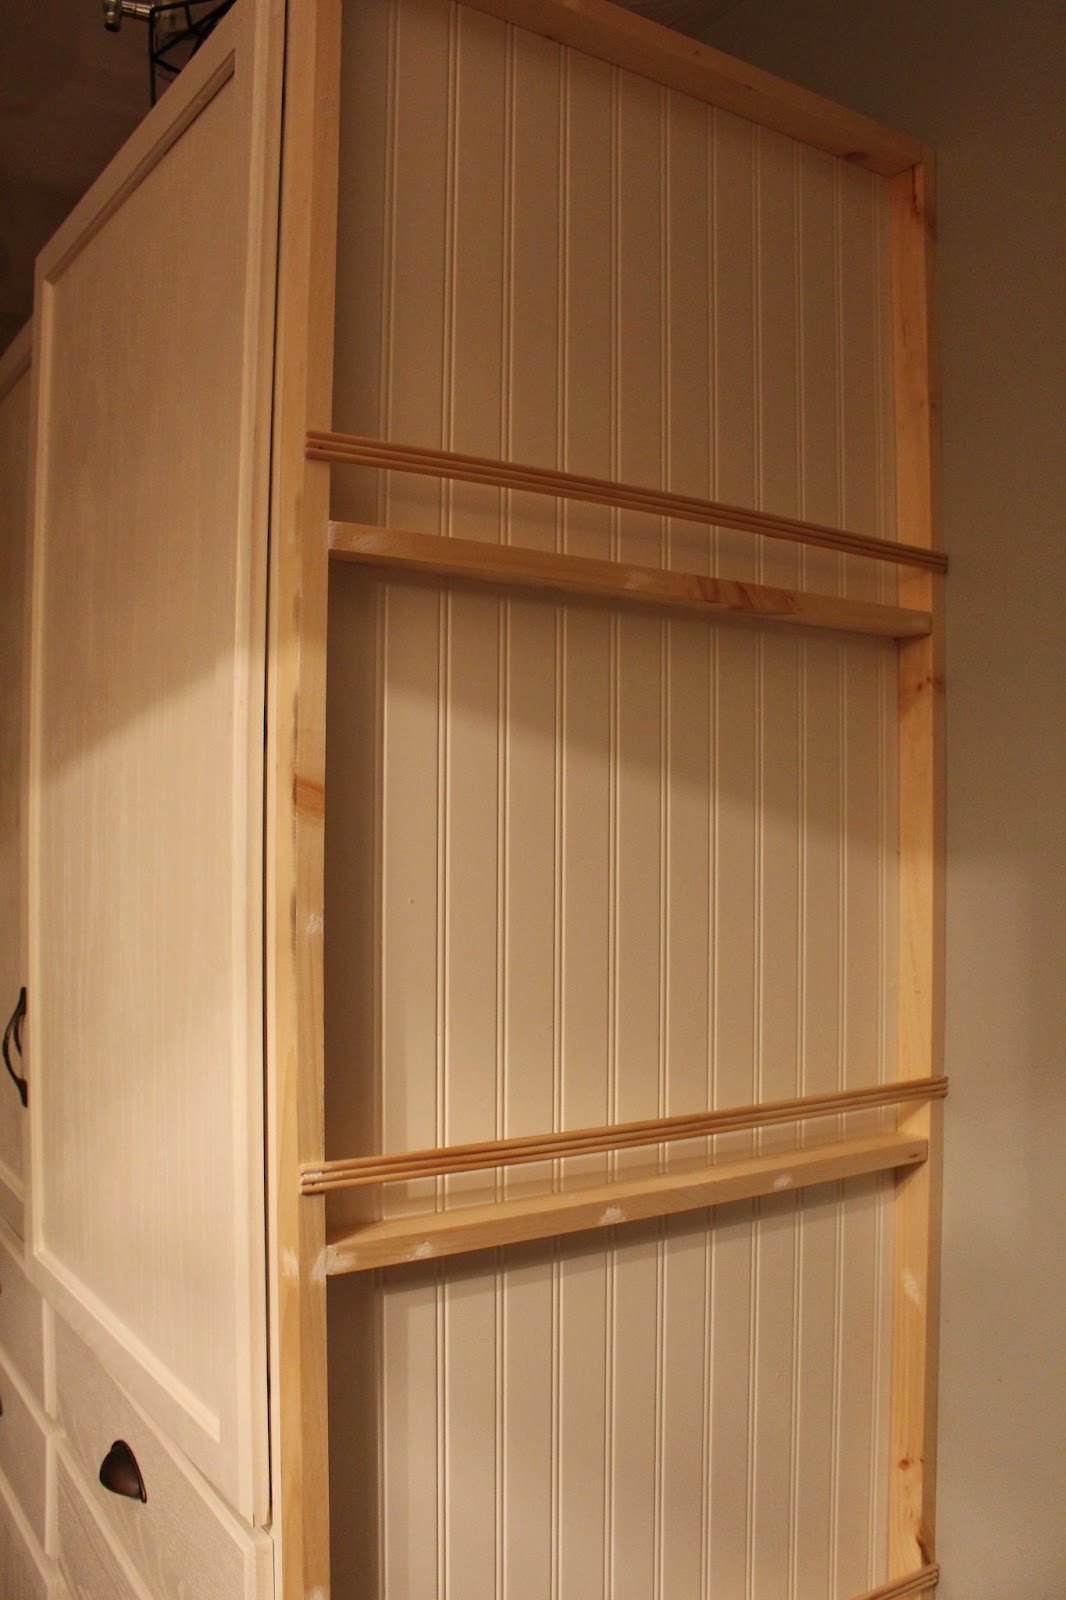 My DIY Kitchen: Plate Rack Wall - Made by Carli